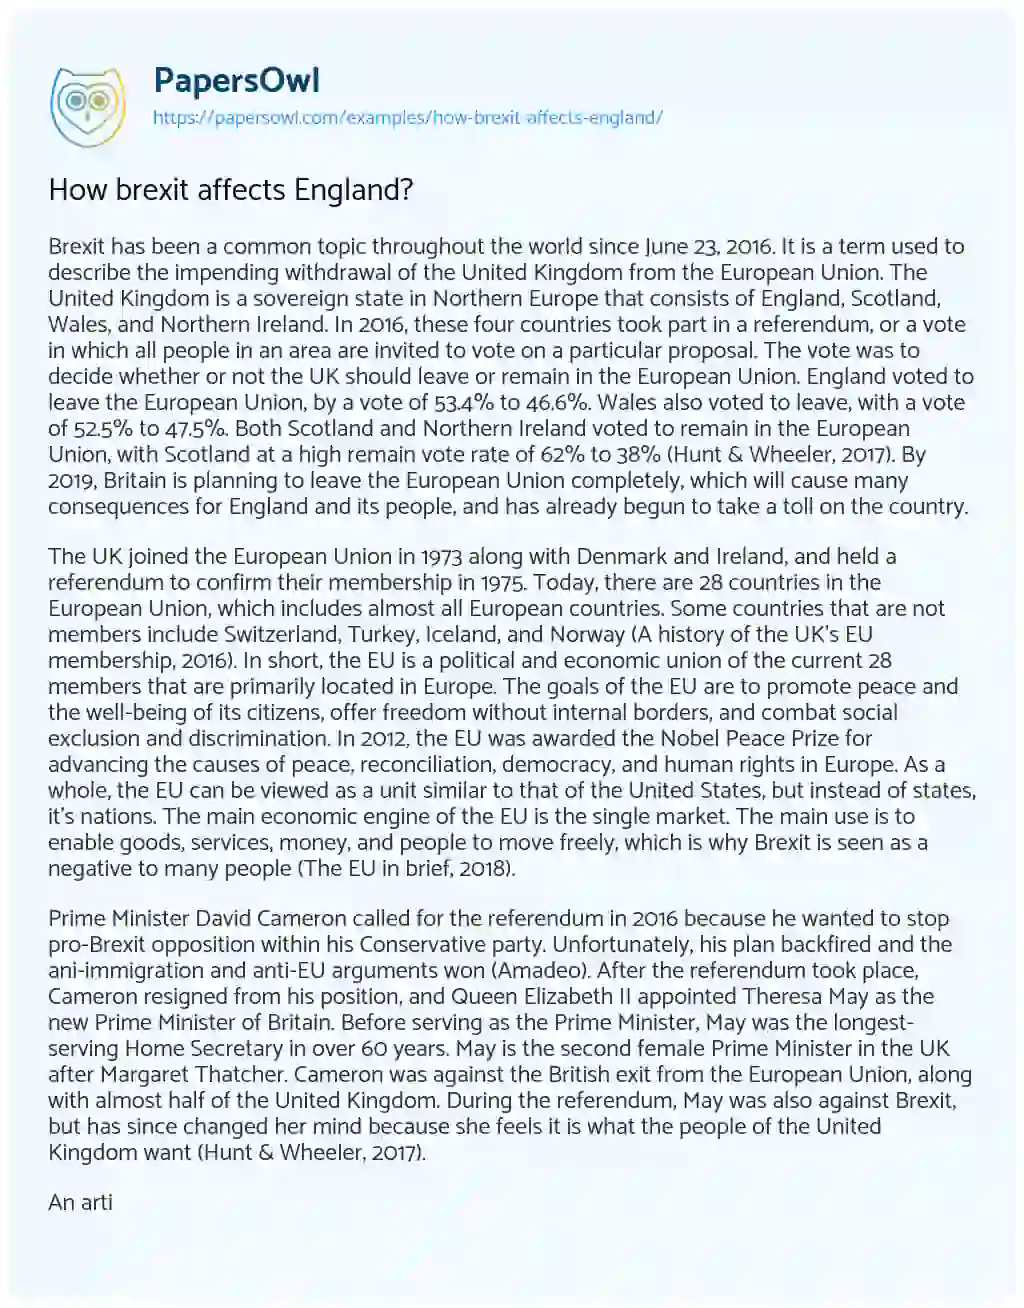 Essay on How Brexit Affects England?